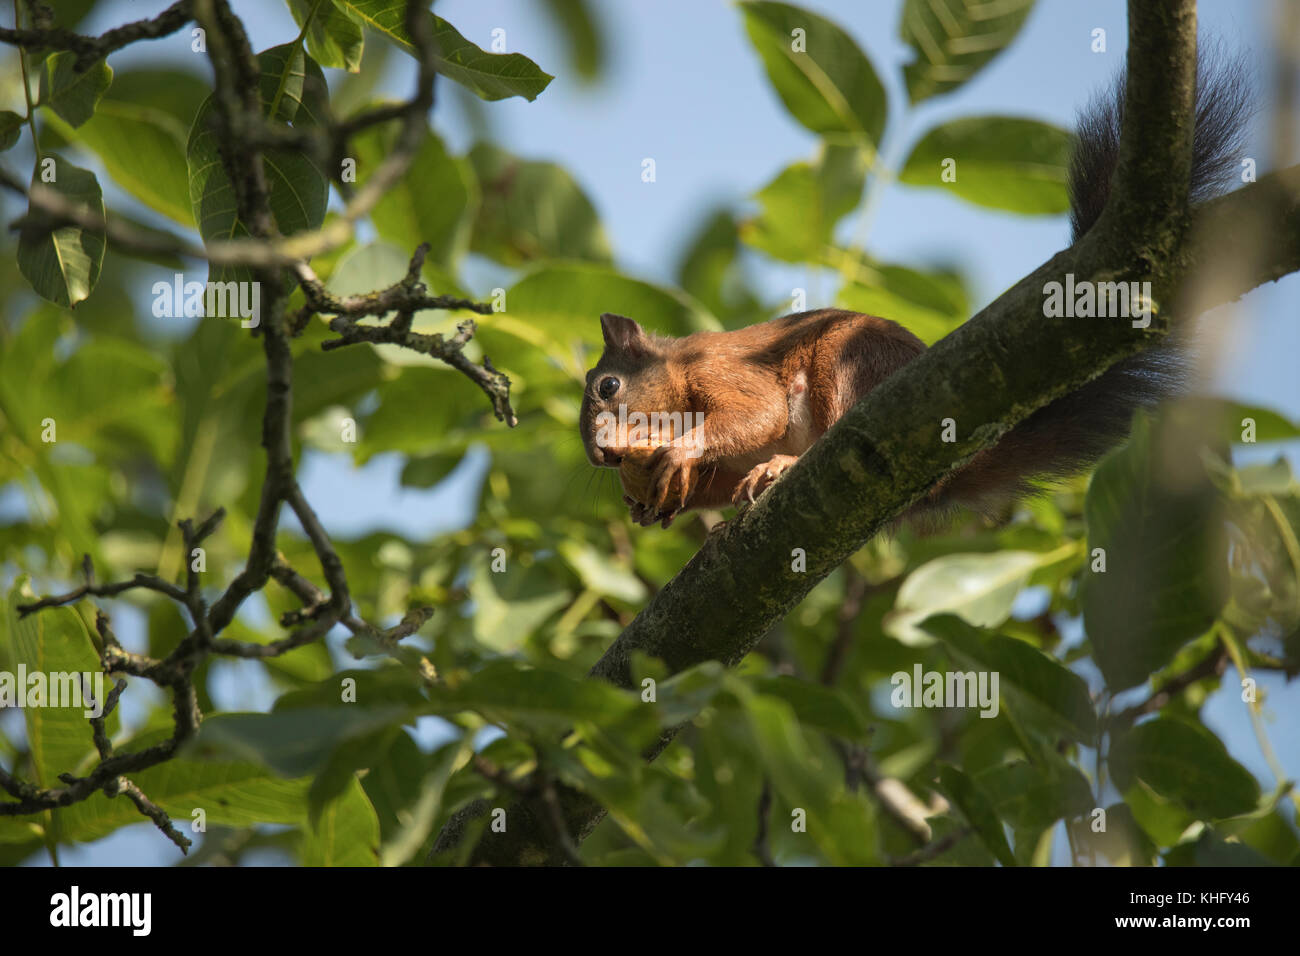 Squirrel sitting high in a tree eating a nut Stock Photo